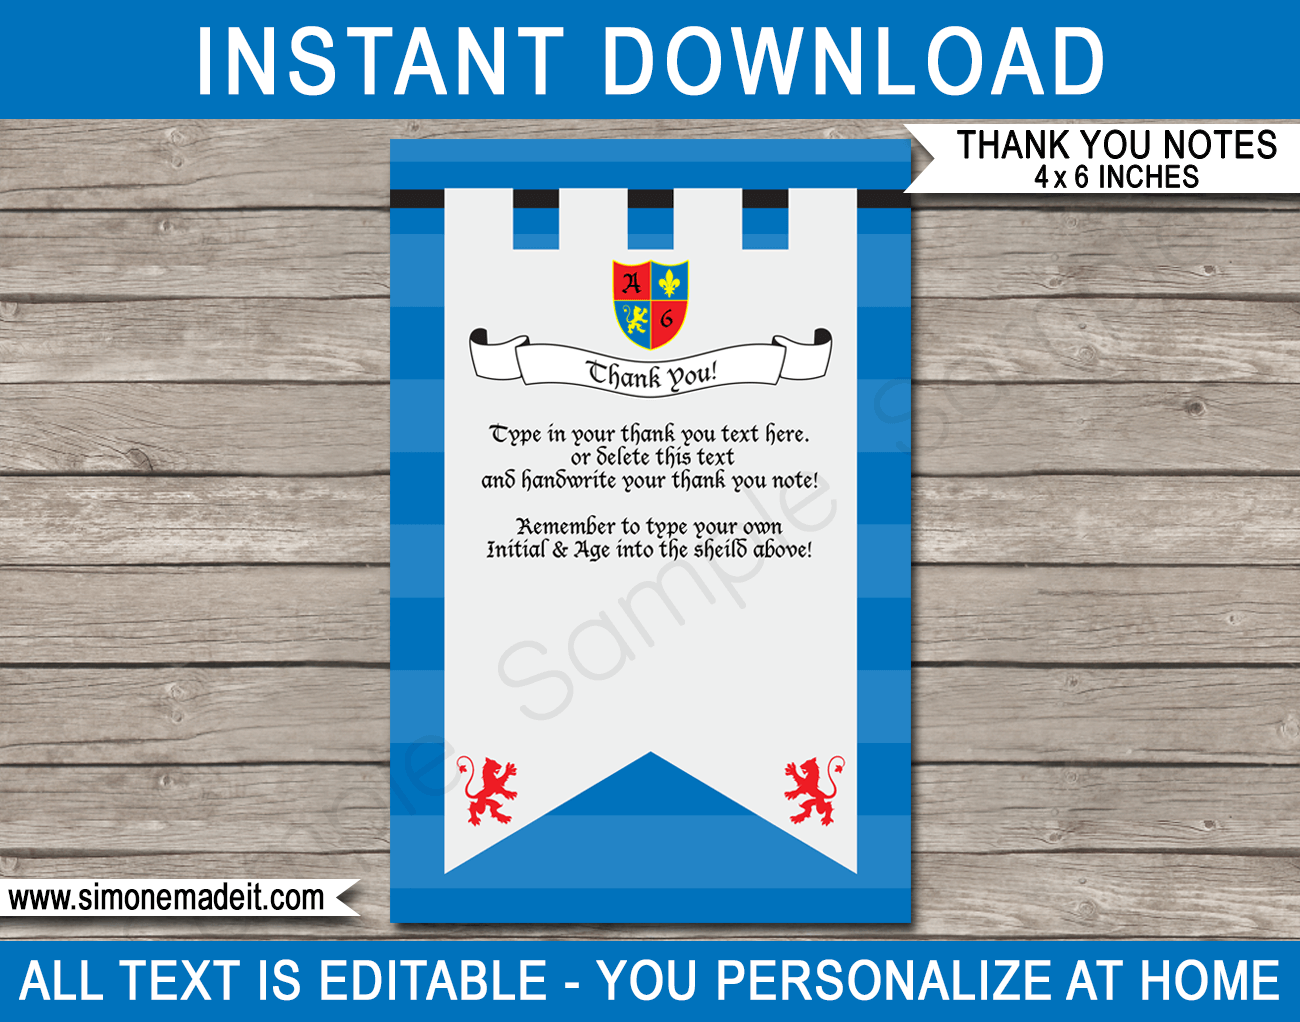 Printable Knight Party Thank You Card Template - Favor Note Tags - Medieval Knight Birthday Party theme - Editable Text - Instant Download via simonemadeit.com